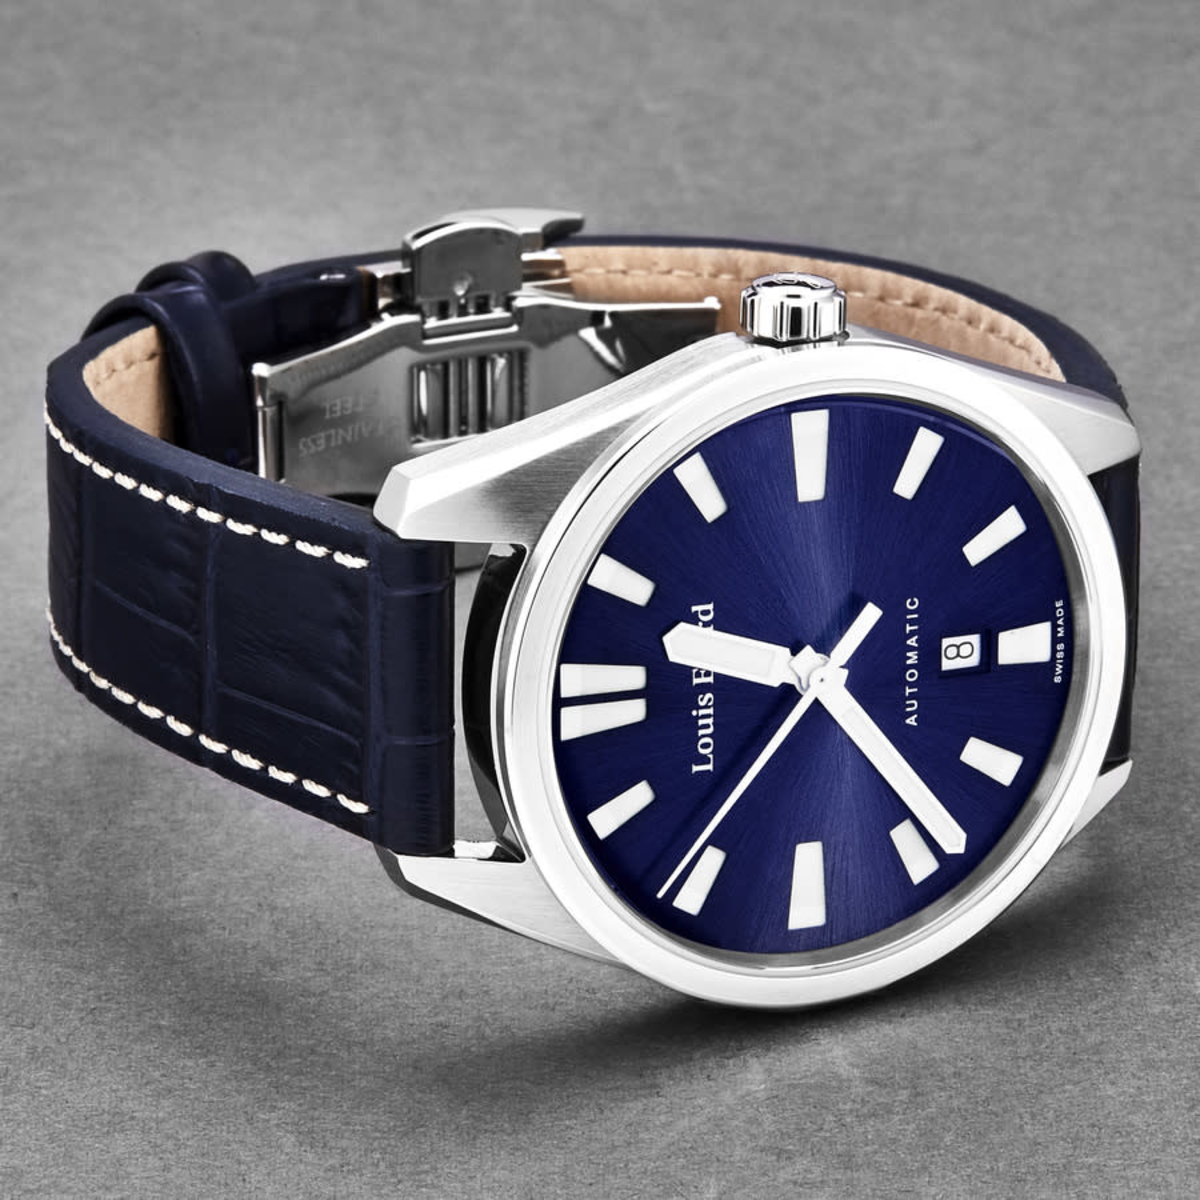 Louis Erard Heritage Automatic Blue Dial Mens Watch 69101aa05